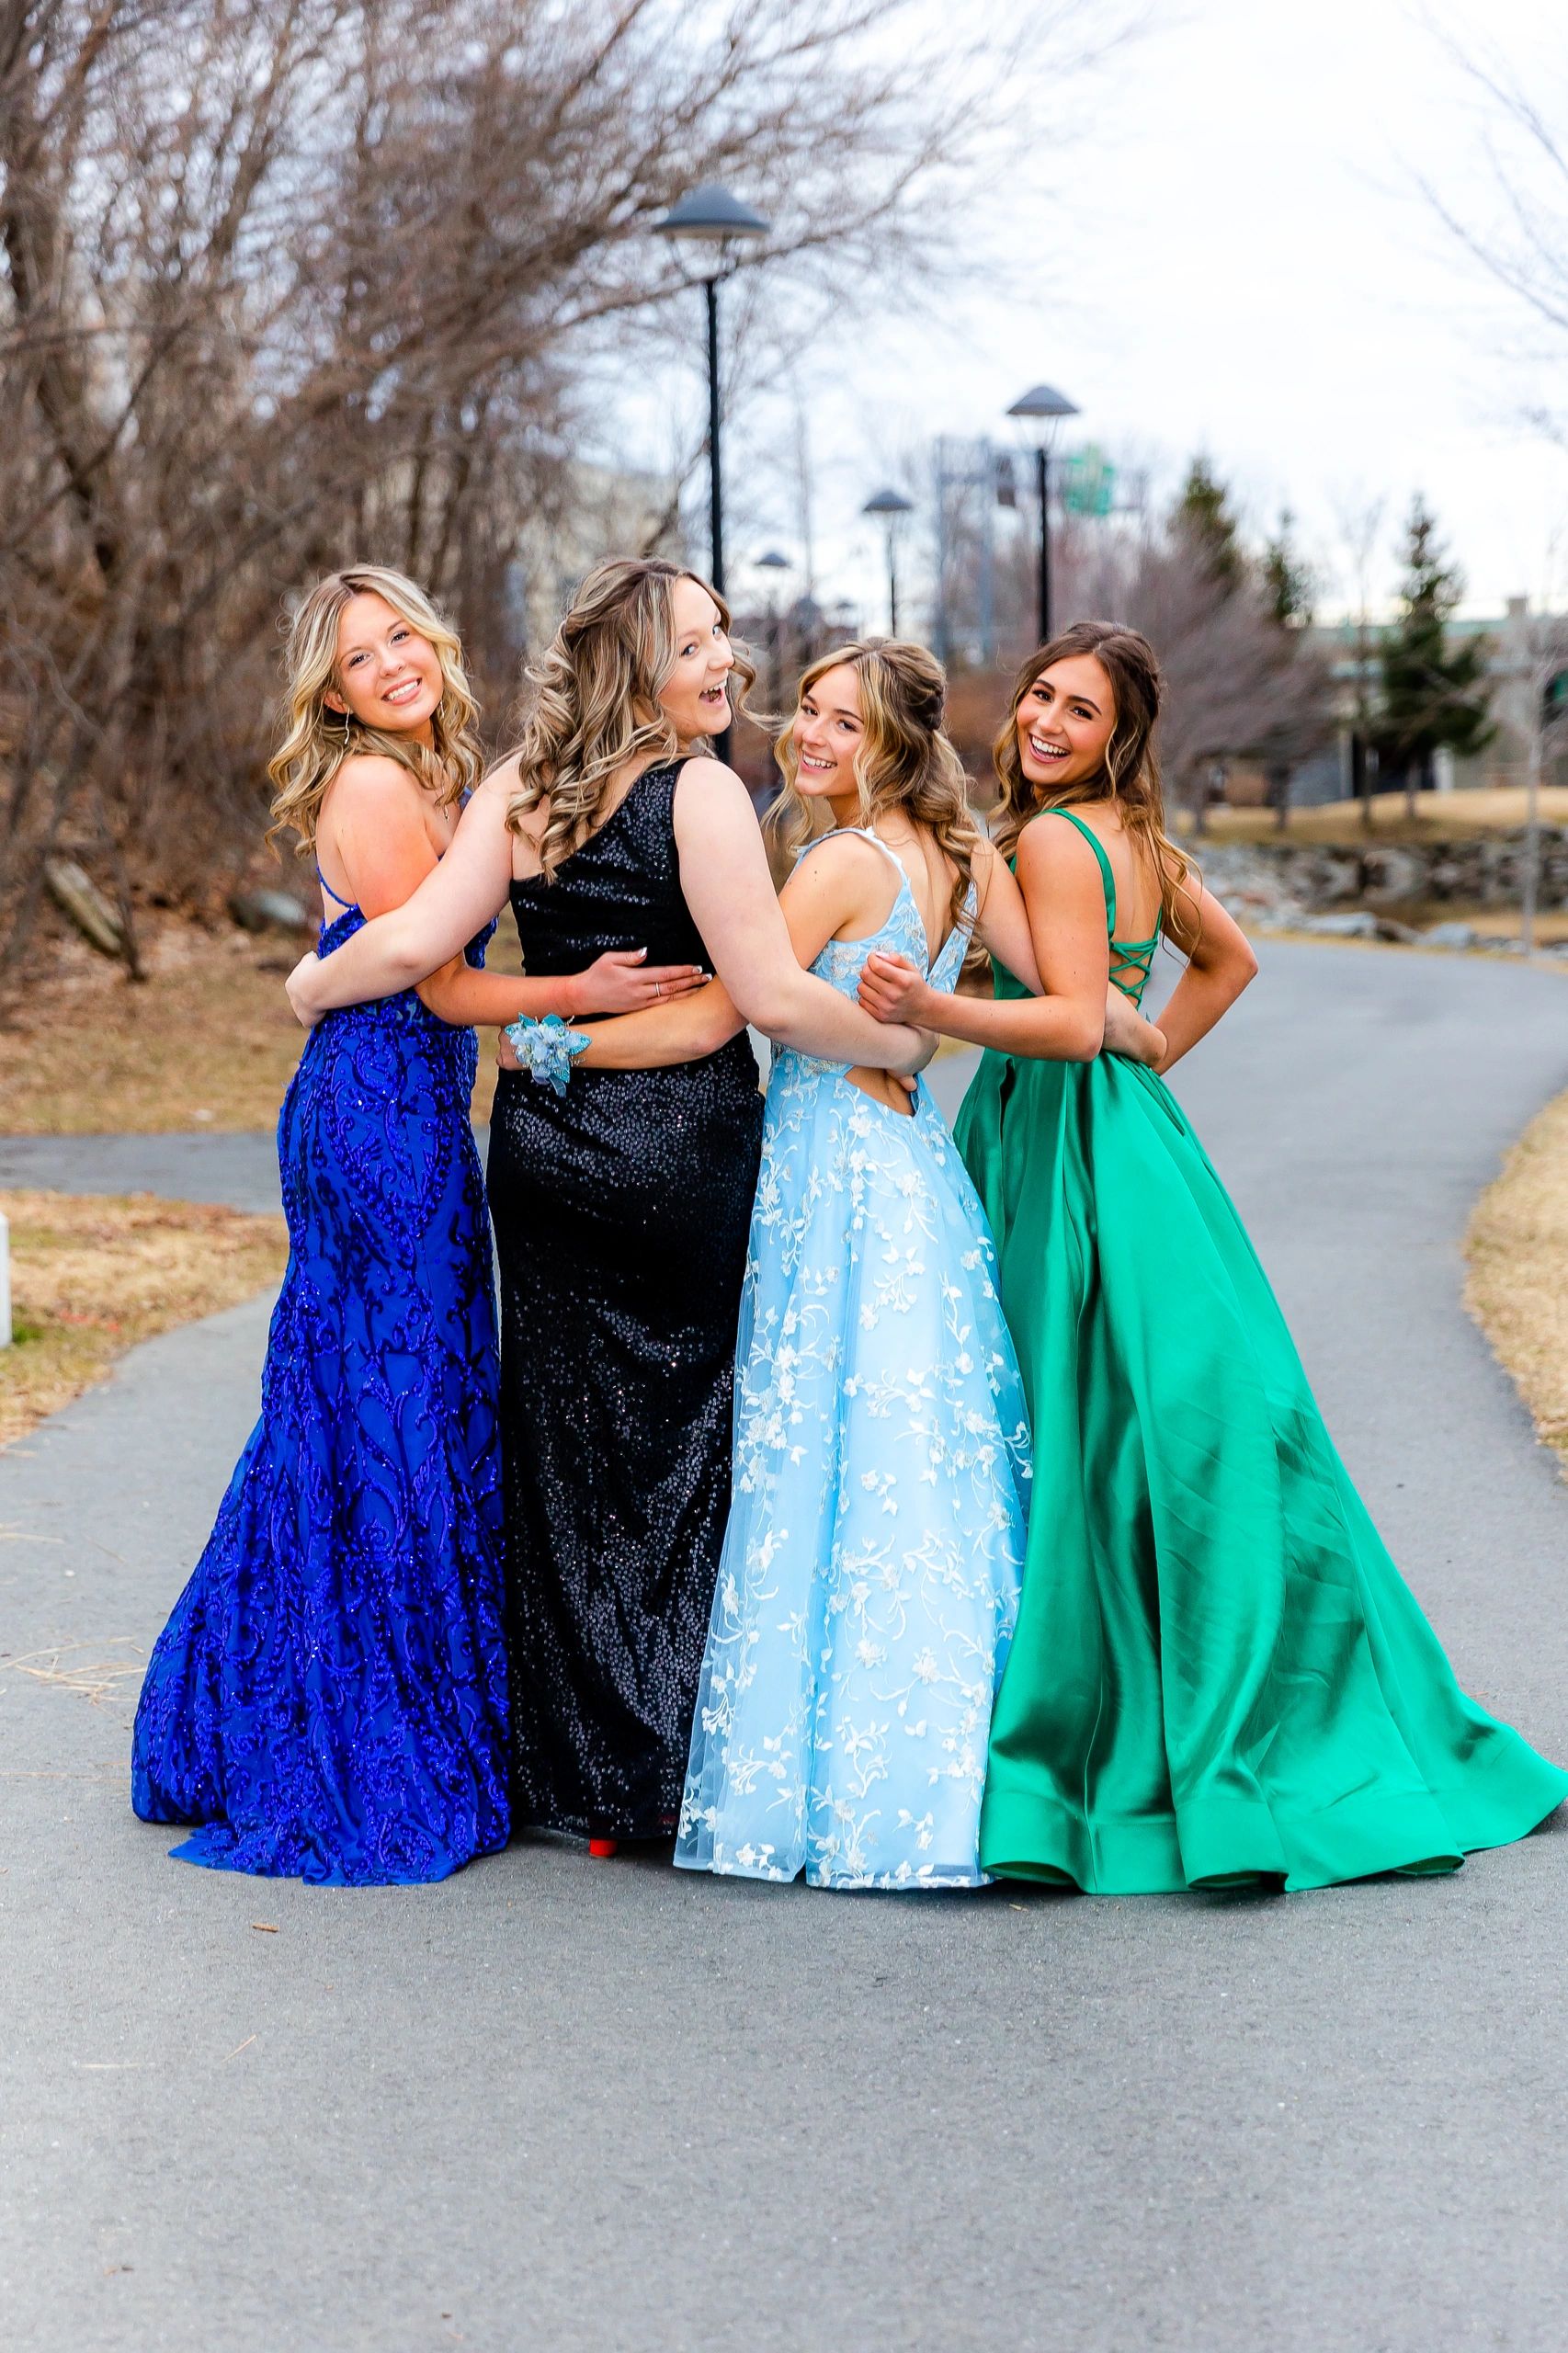 5 Tips on Taking Awesome Prom Photos for Teens and Parents